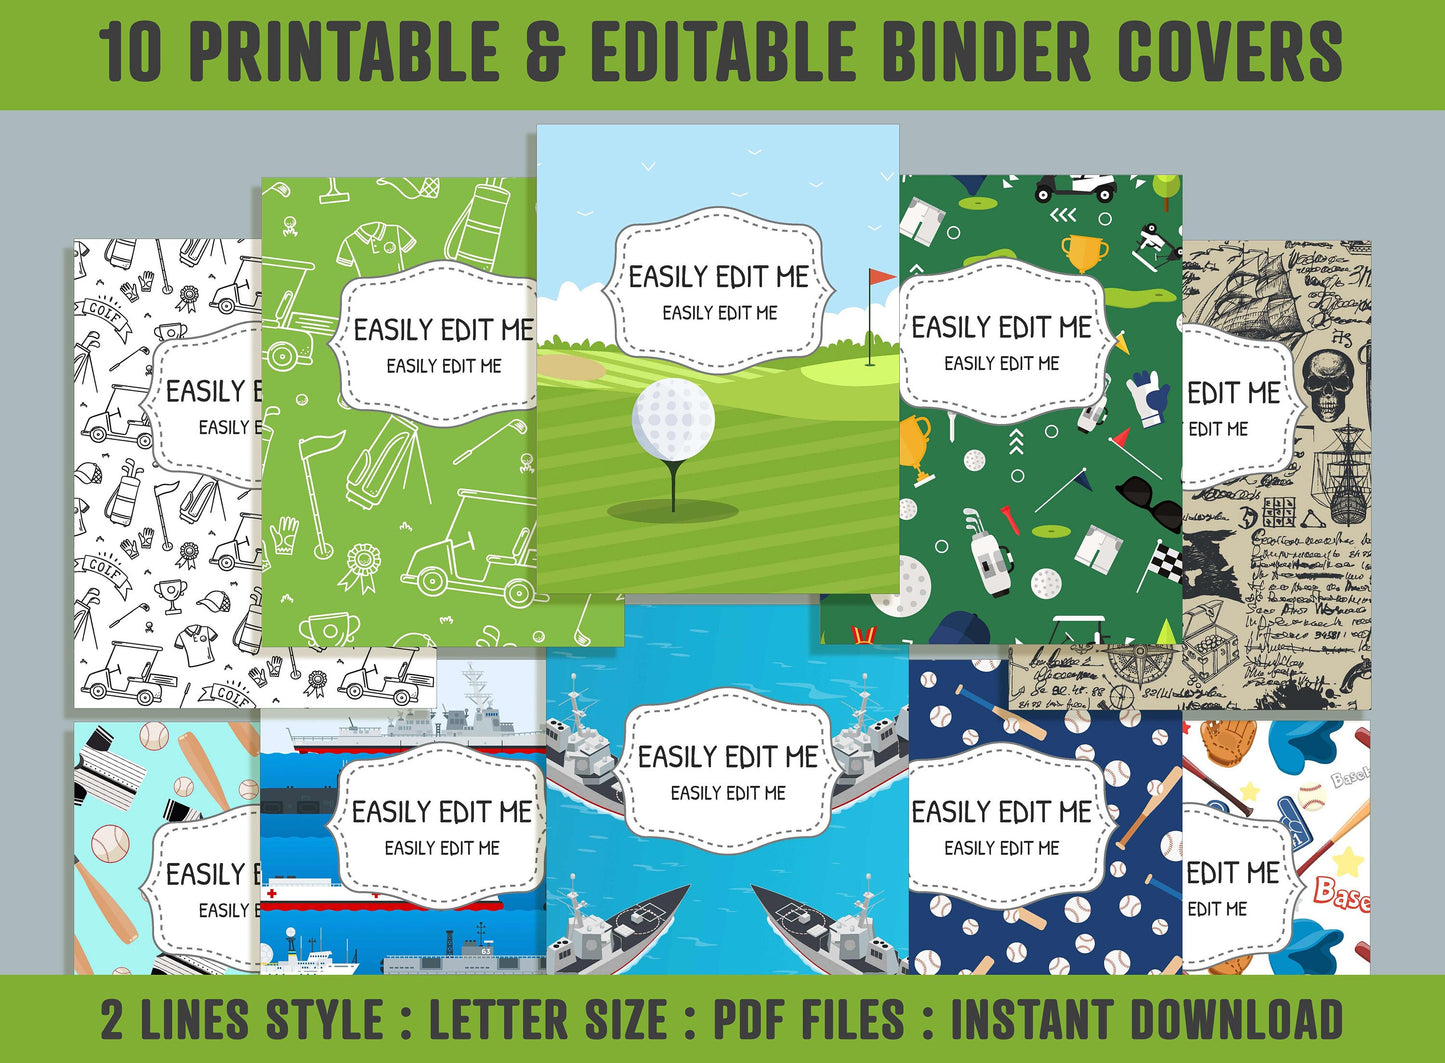 Golf, Marine and Baseball Binder Cover, 10 Printable & Editable Binder Covers+Spines, Binder Inserts, Teacher/School Planner Cover Template